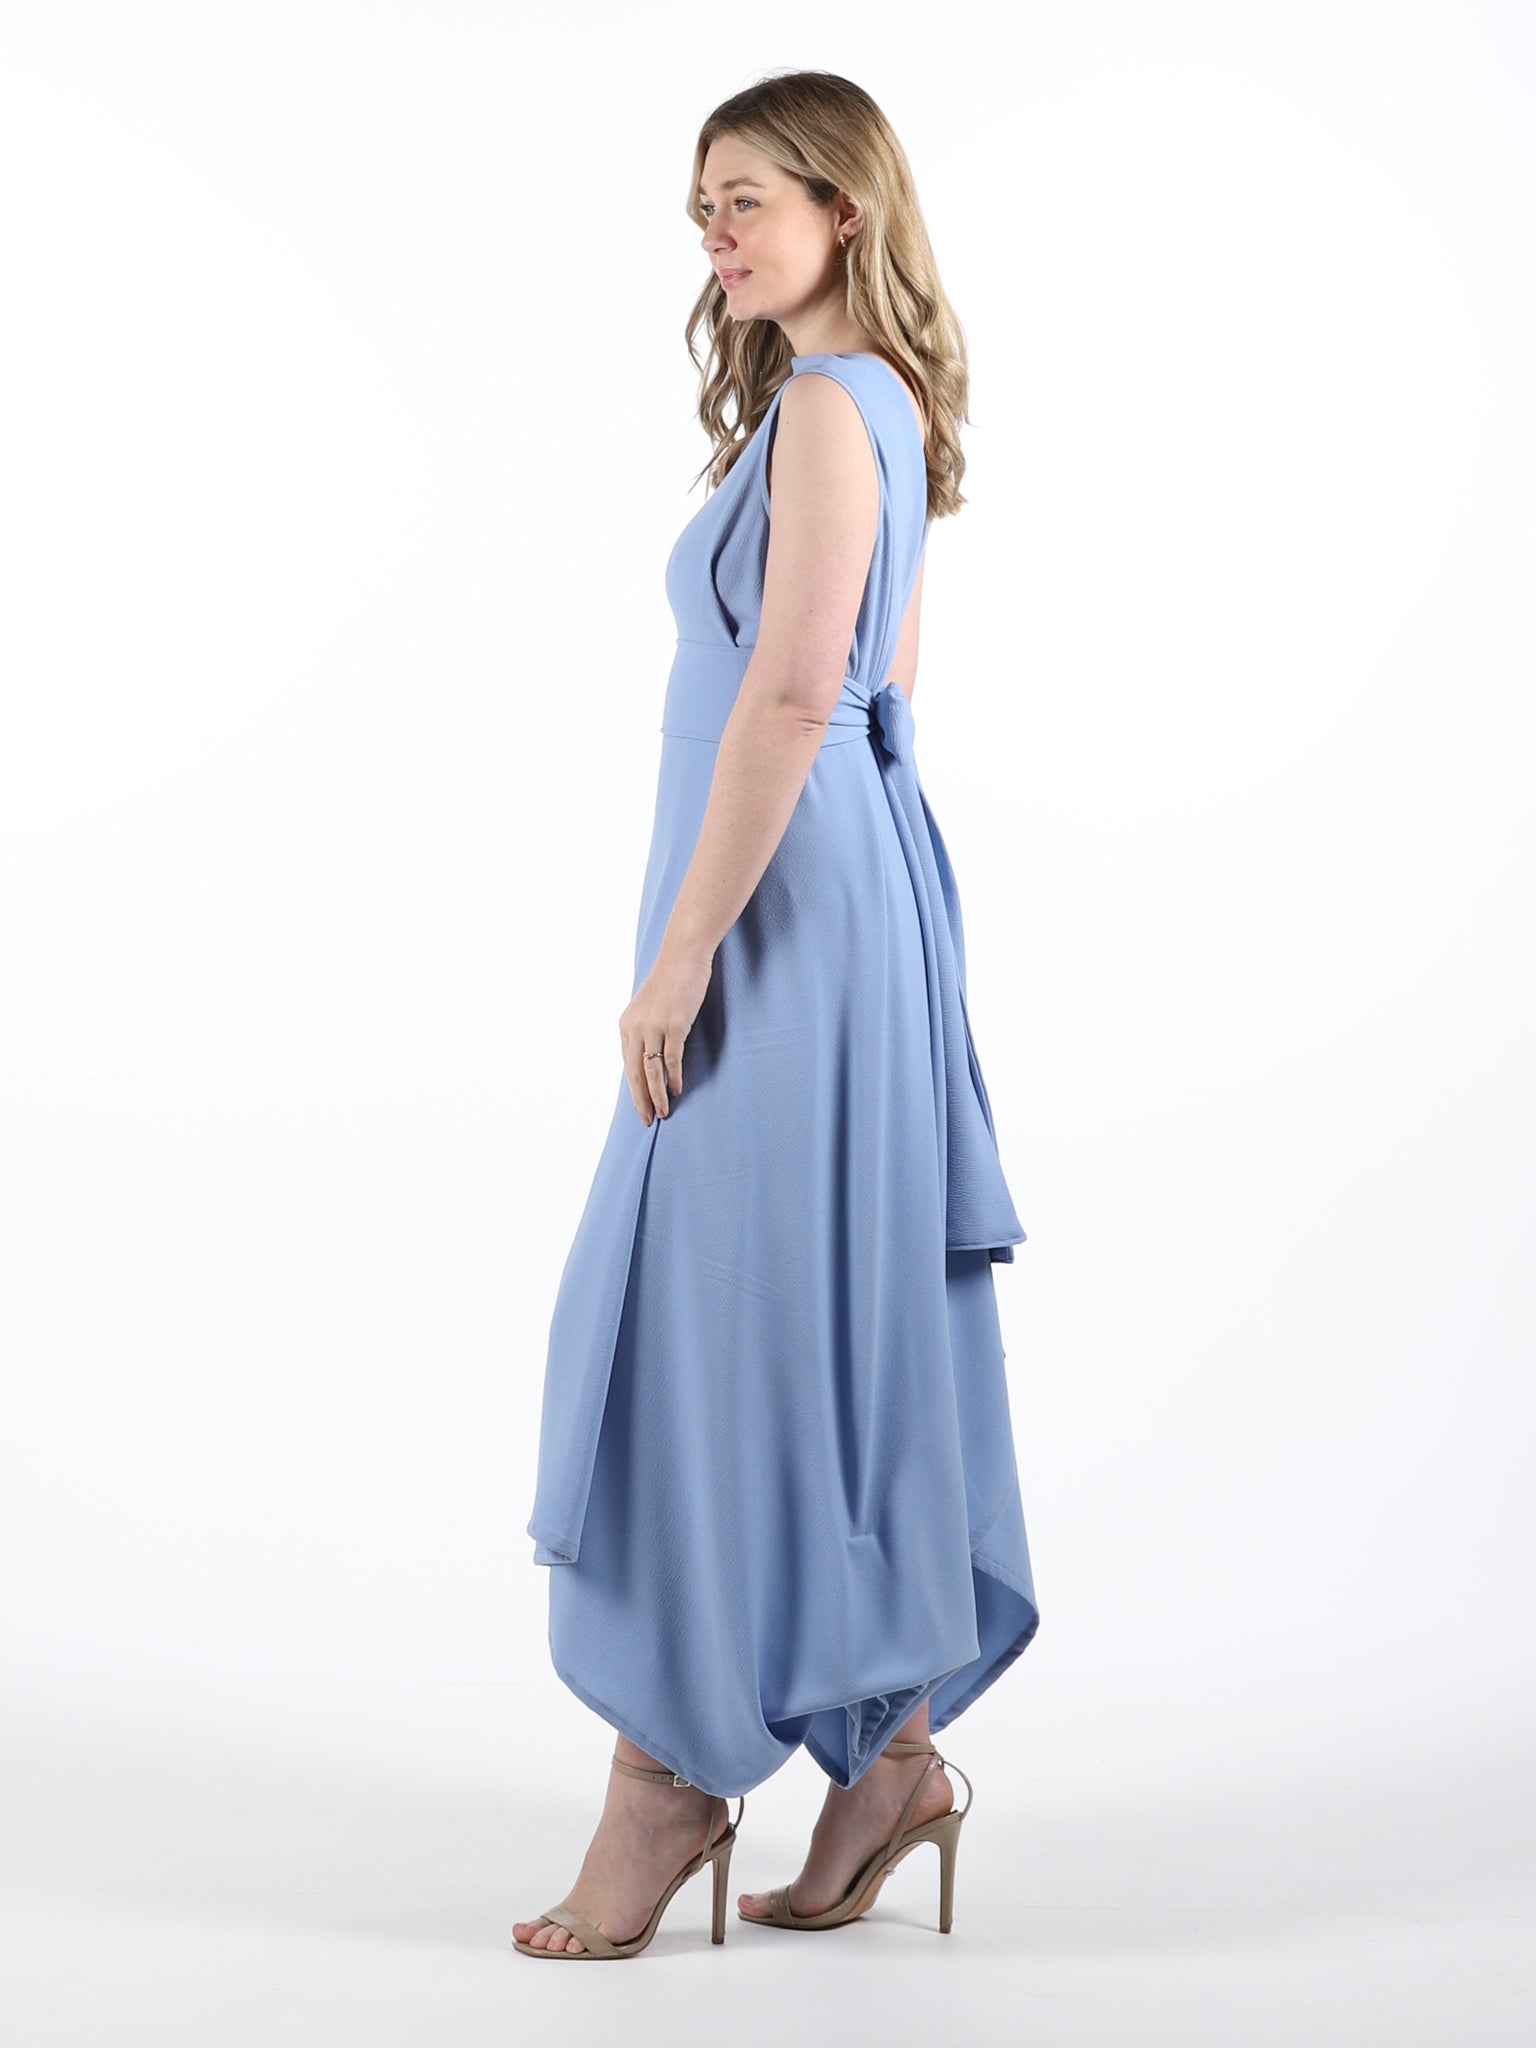 Baby Blue Darcy Dress (worn back to front)